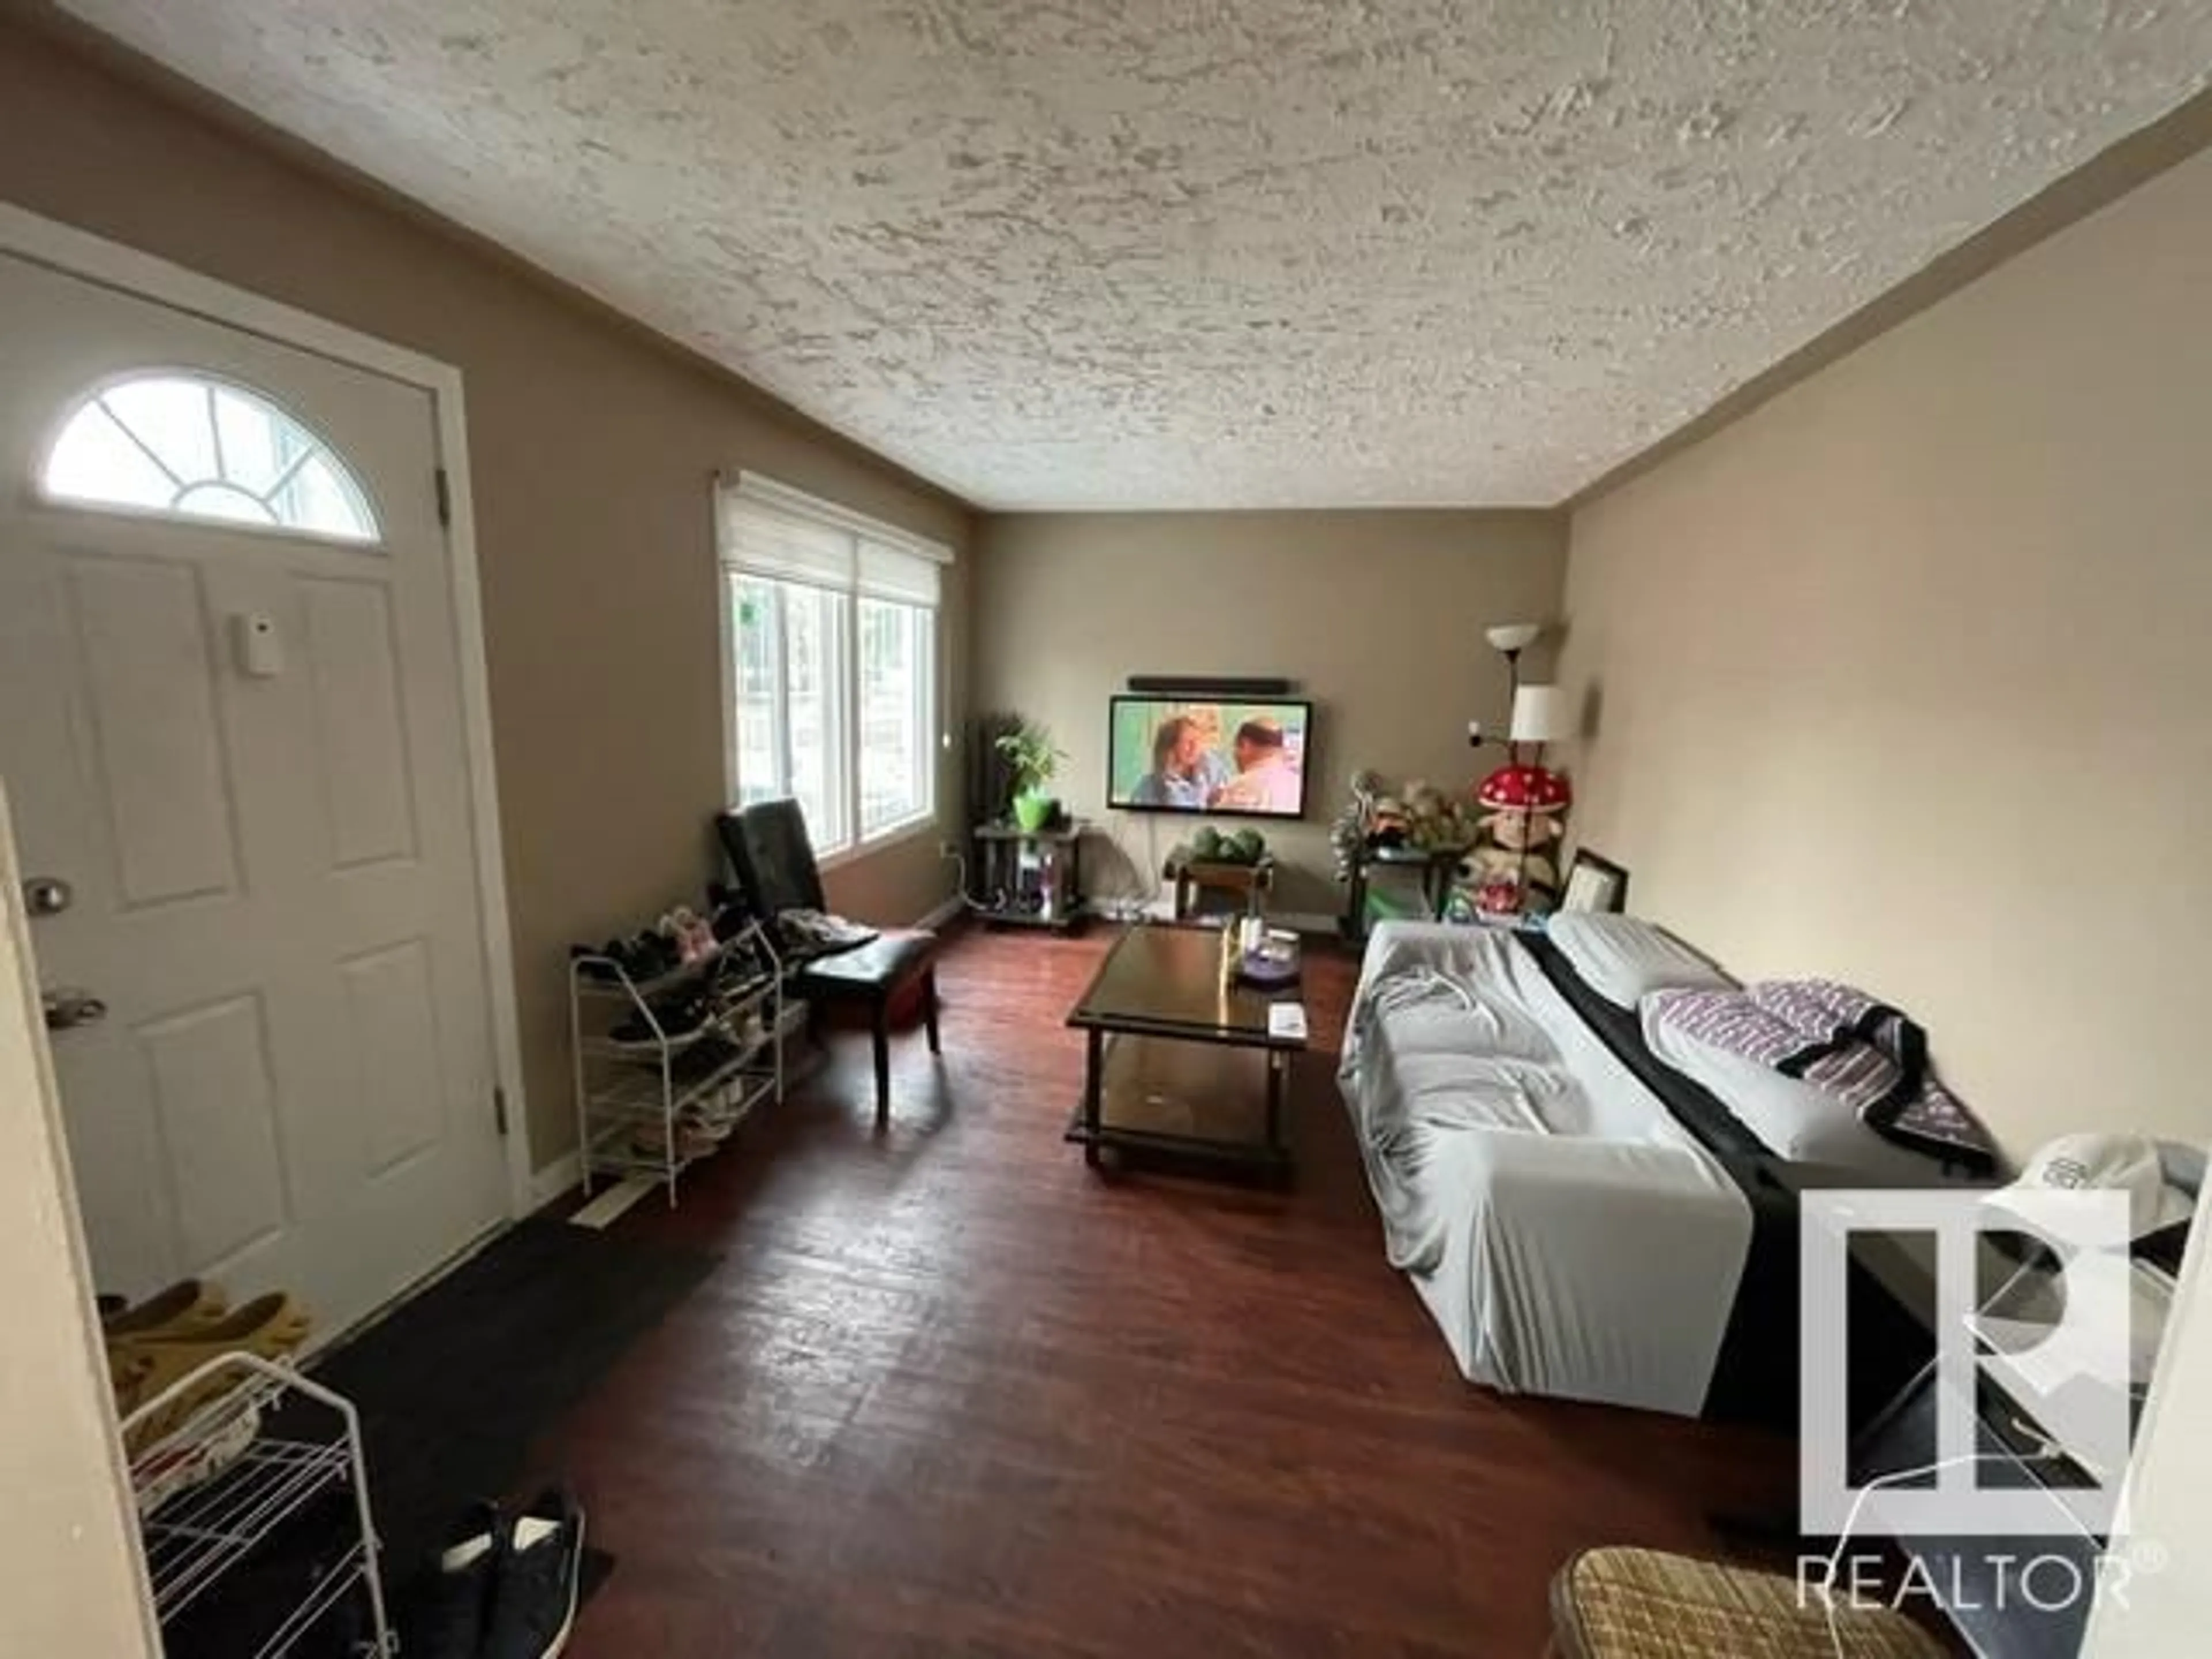 A pic of a room for 11720 89 ST NW, Edmonton Alberta T5B3V5